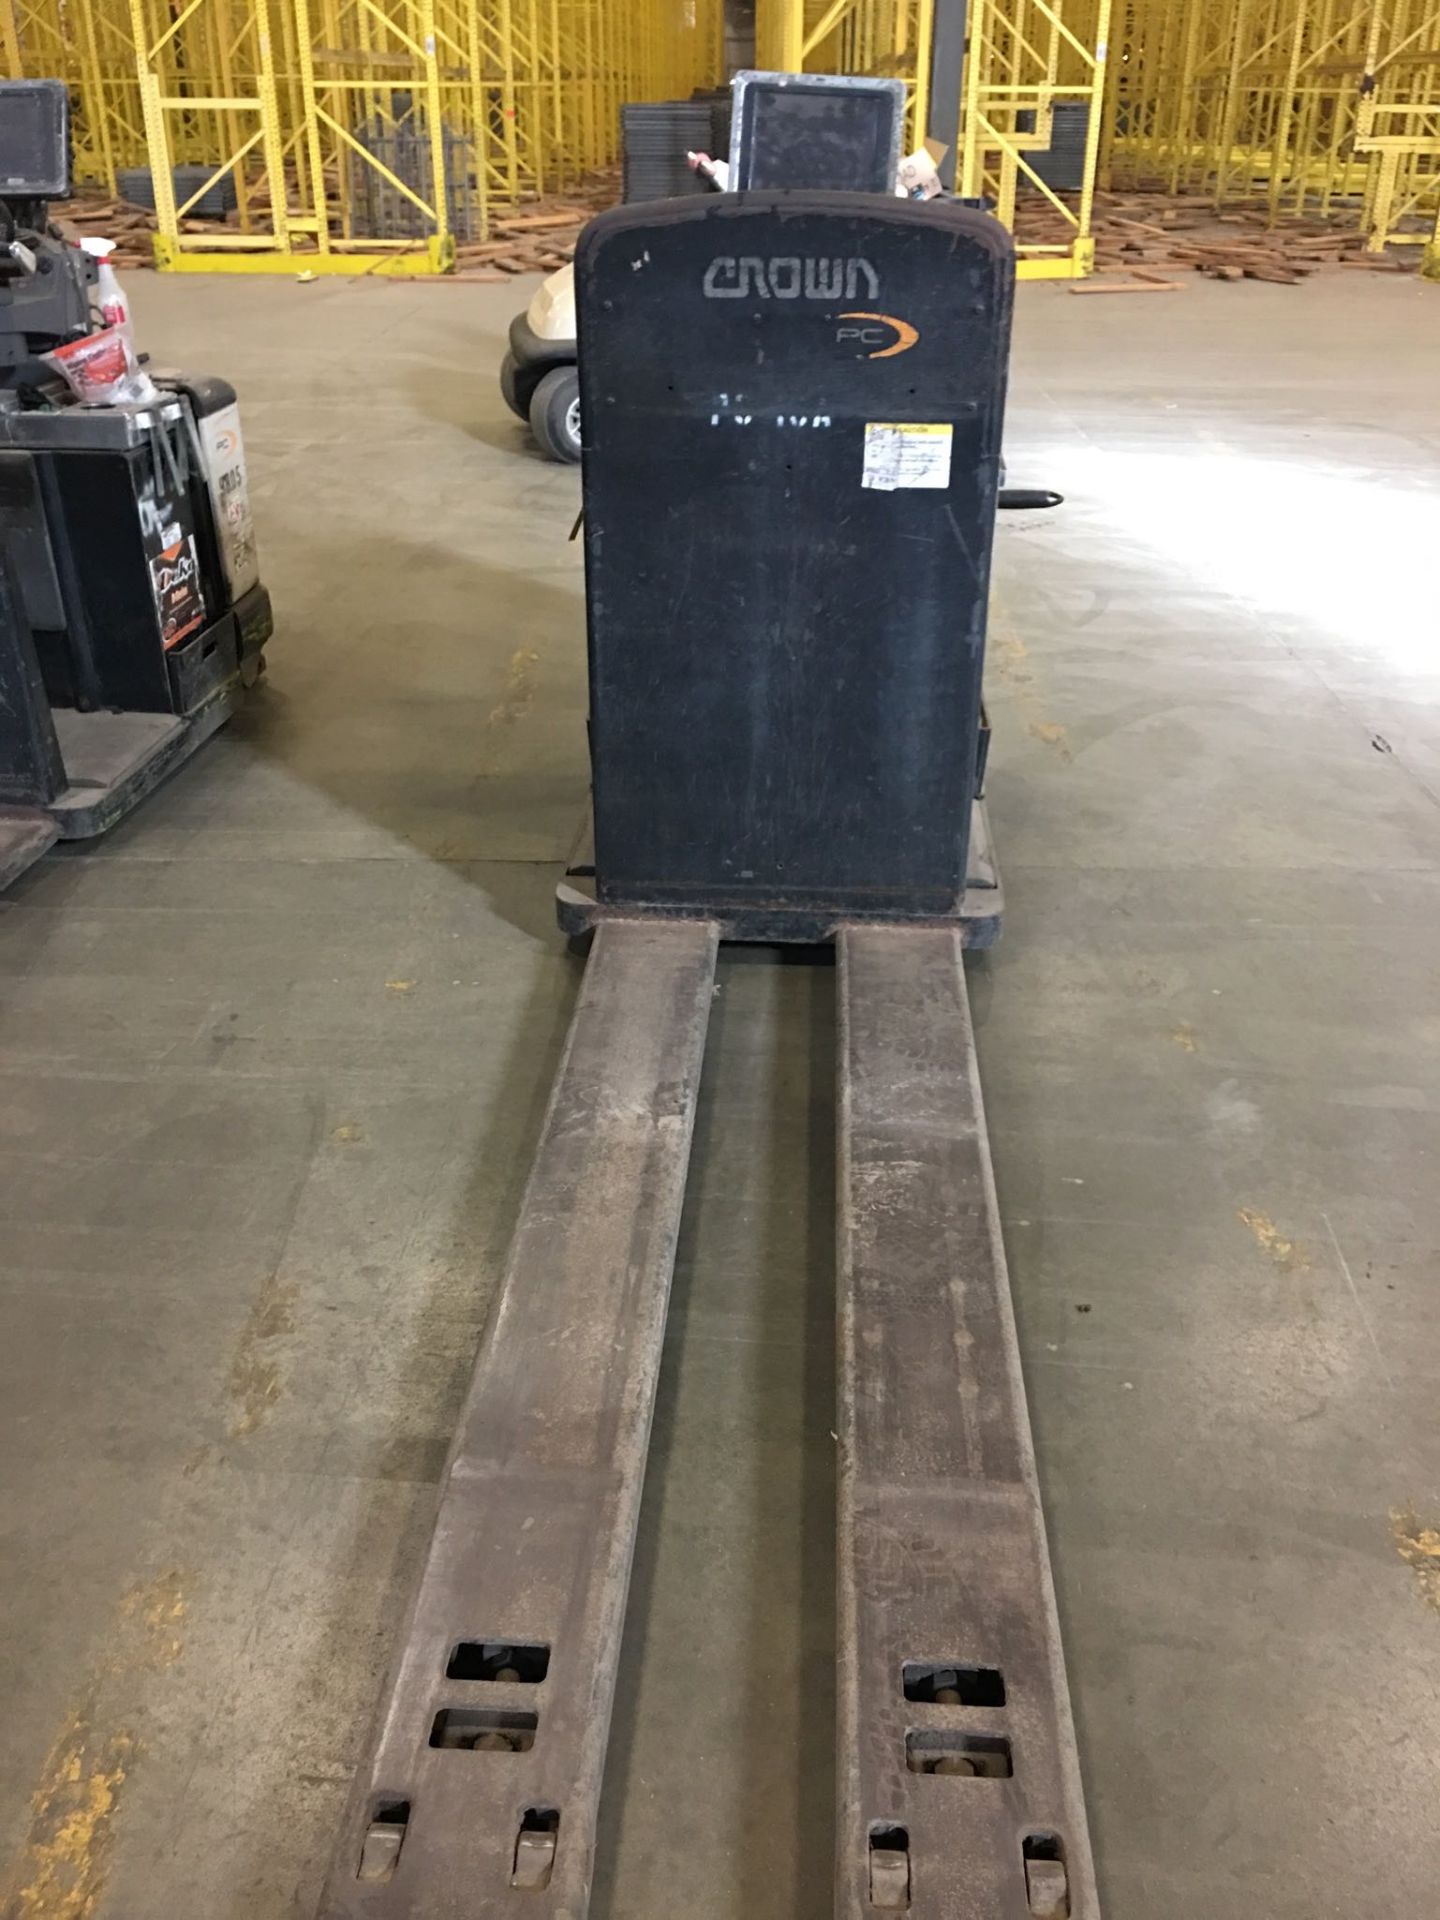 CROWN ELECTRIC PALLET JACK. Model #: PC4500. S/N: 6A315423. Hours (as of Oct 15, 2018): 3880. - Image 3 of 3